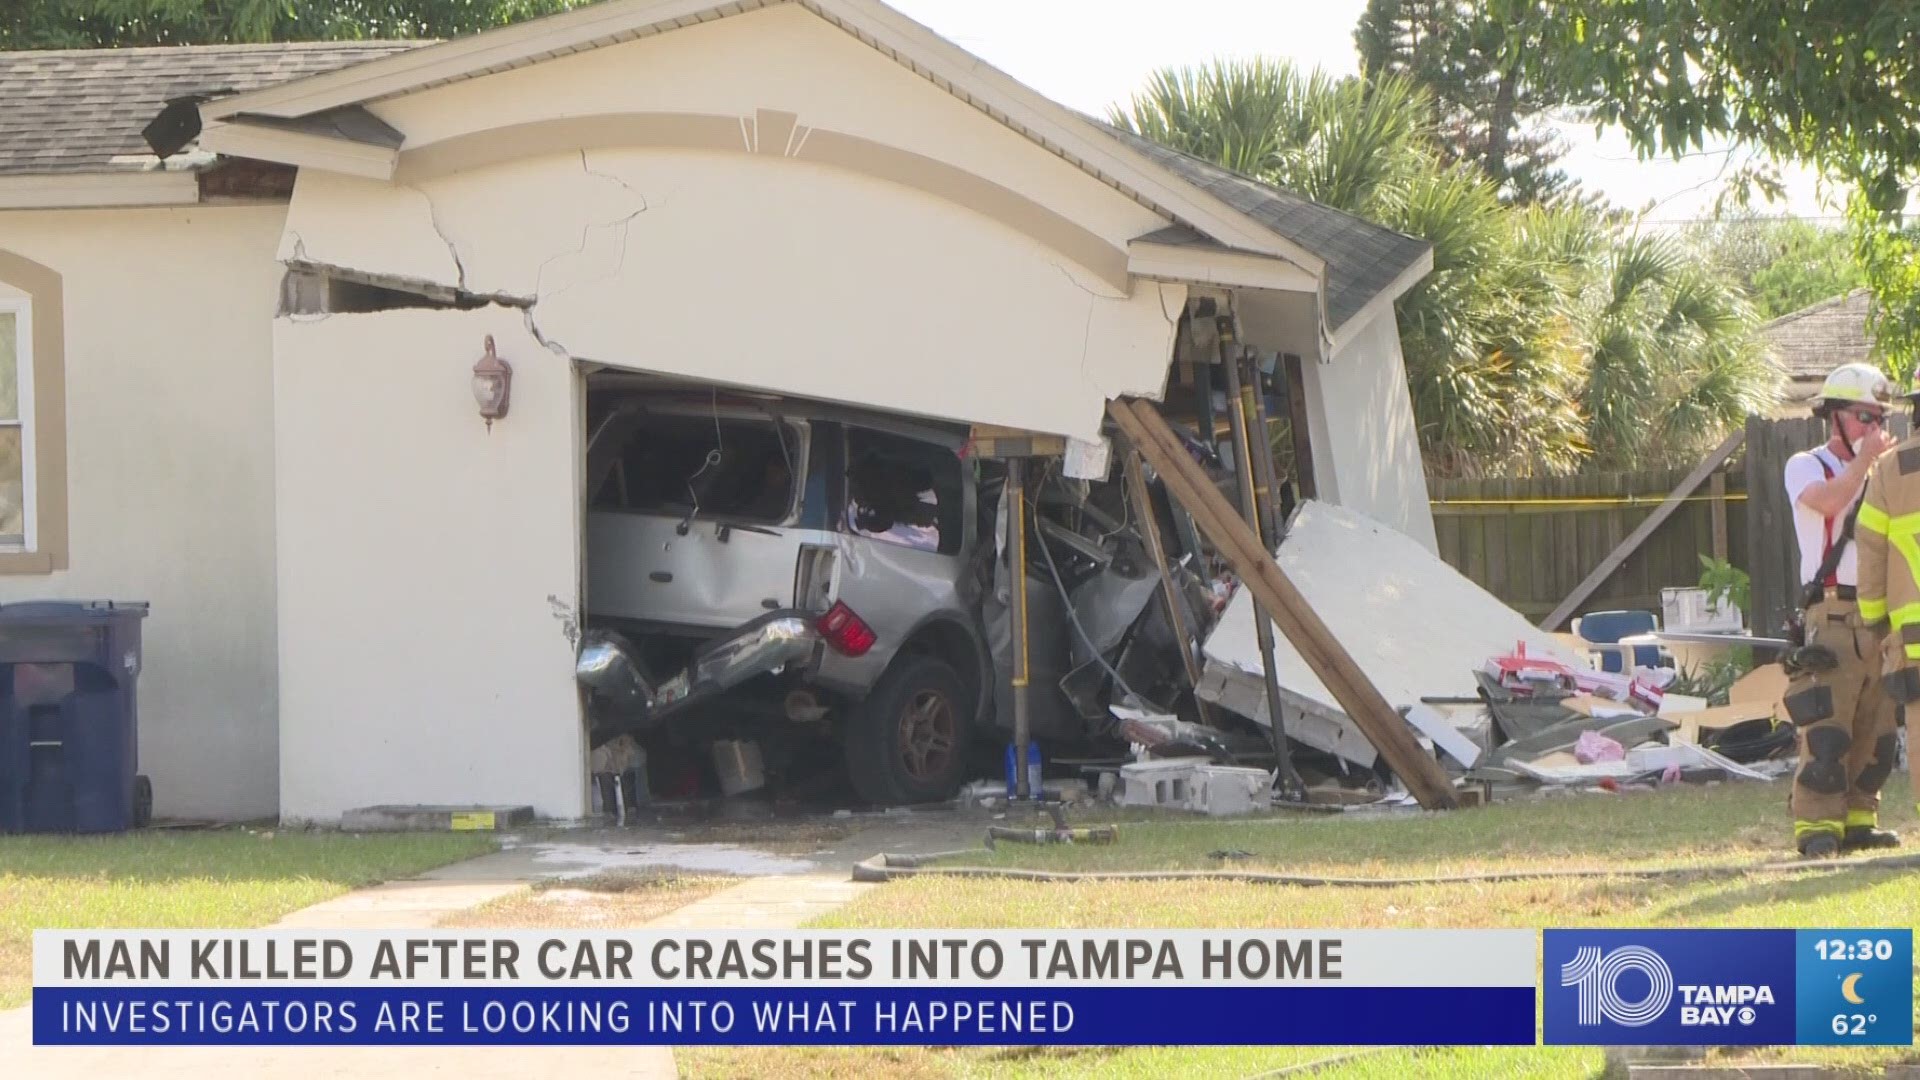 People inside the house are OK, Tampa police say.